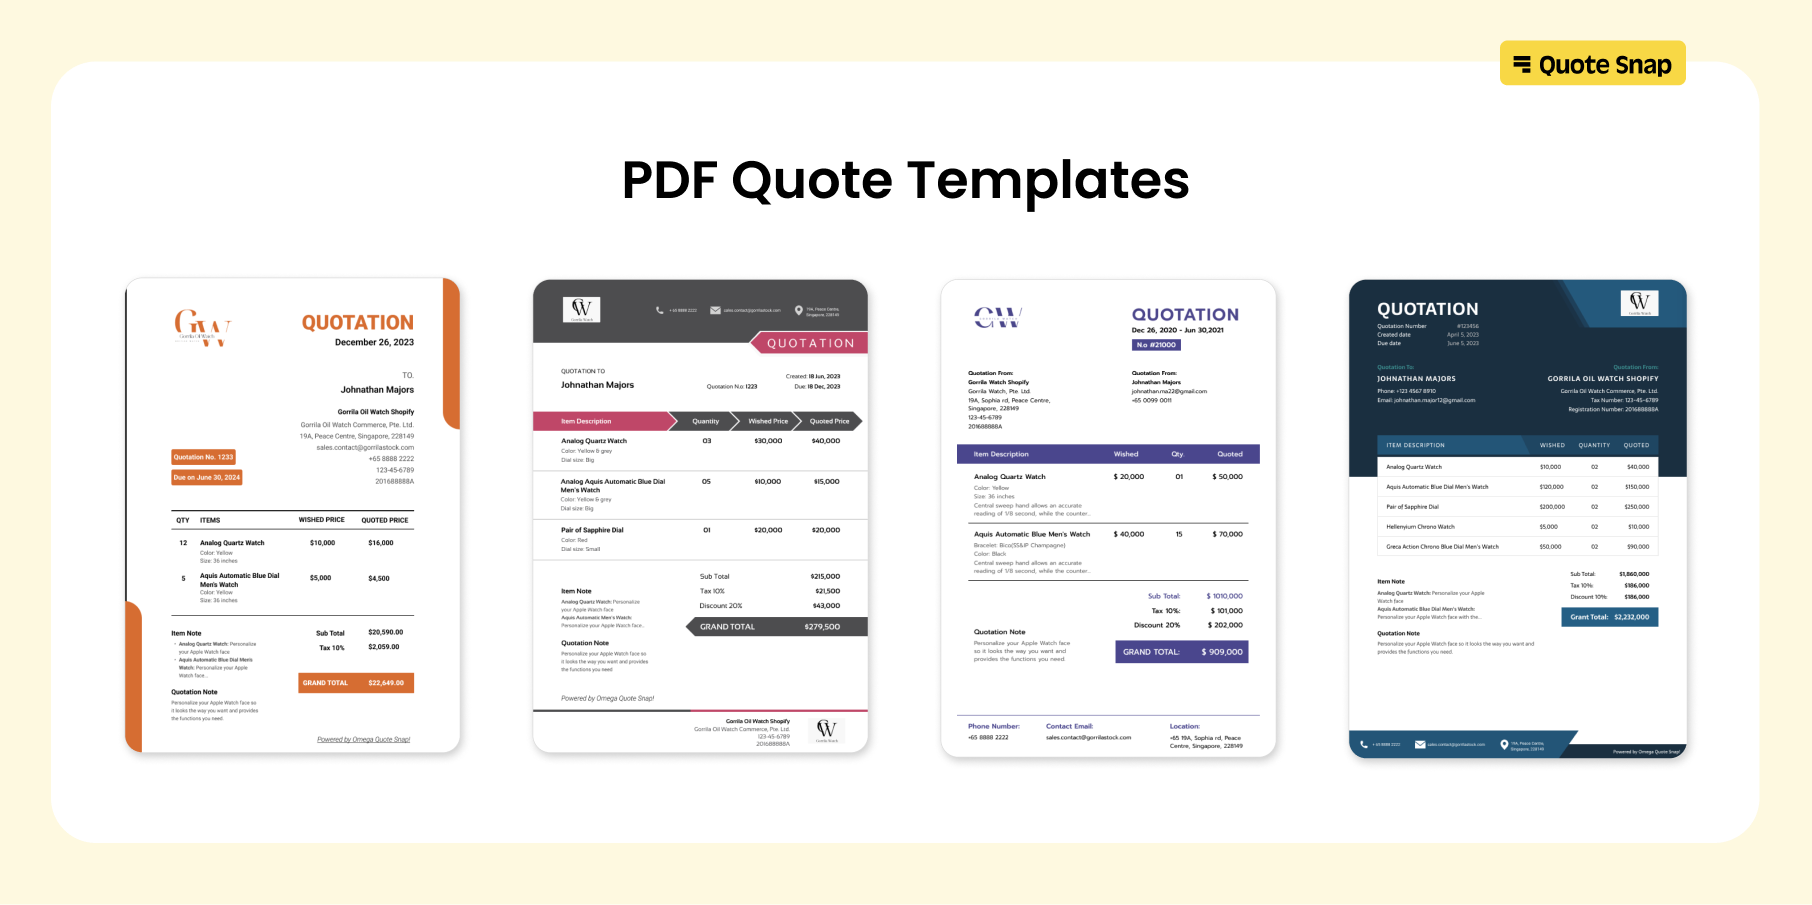 Request for quote (RFQ) PDF templates